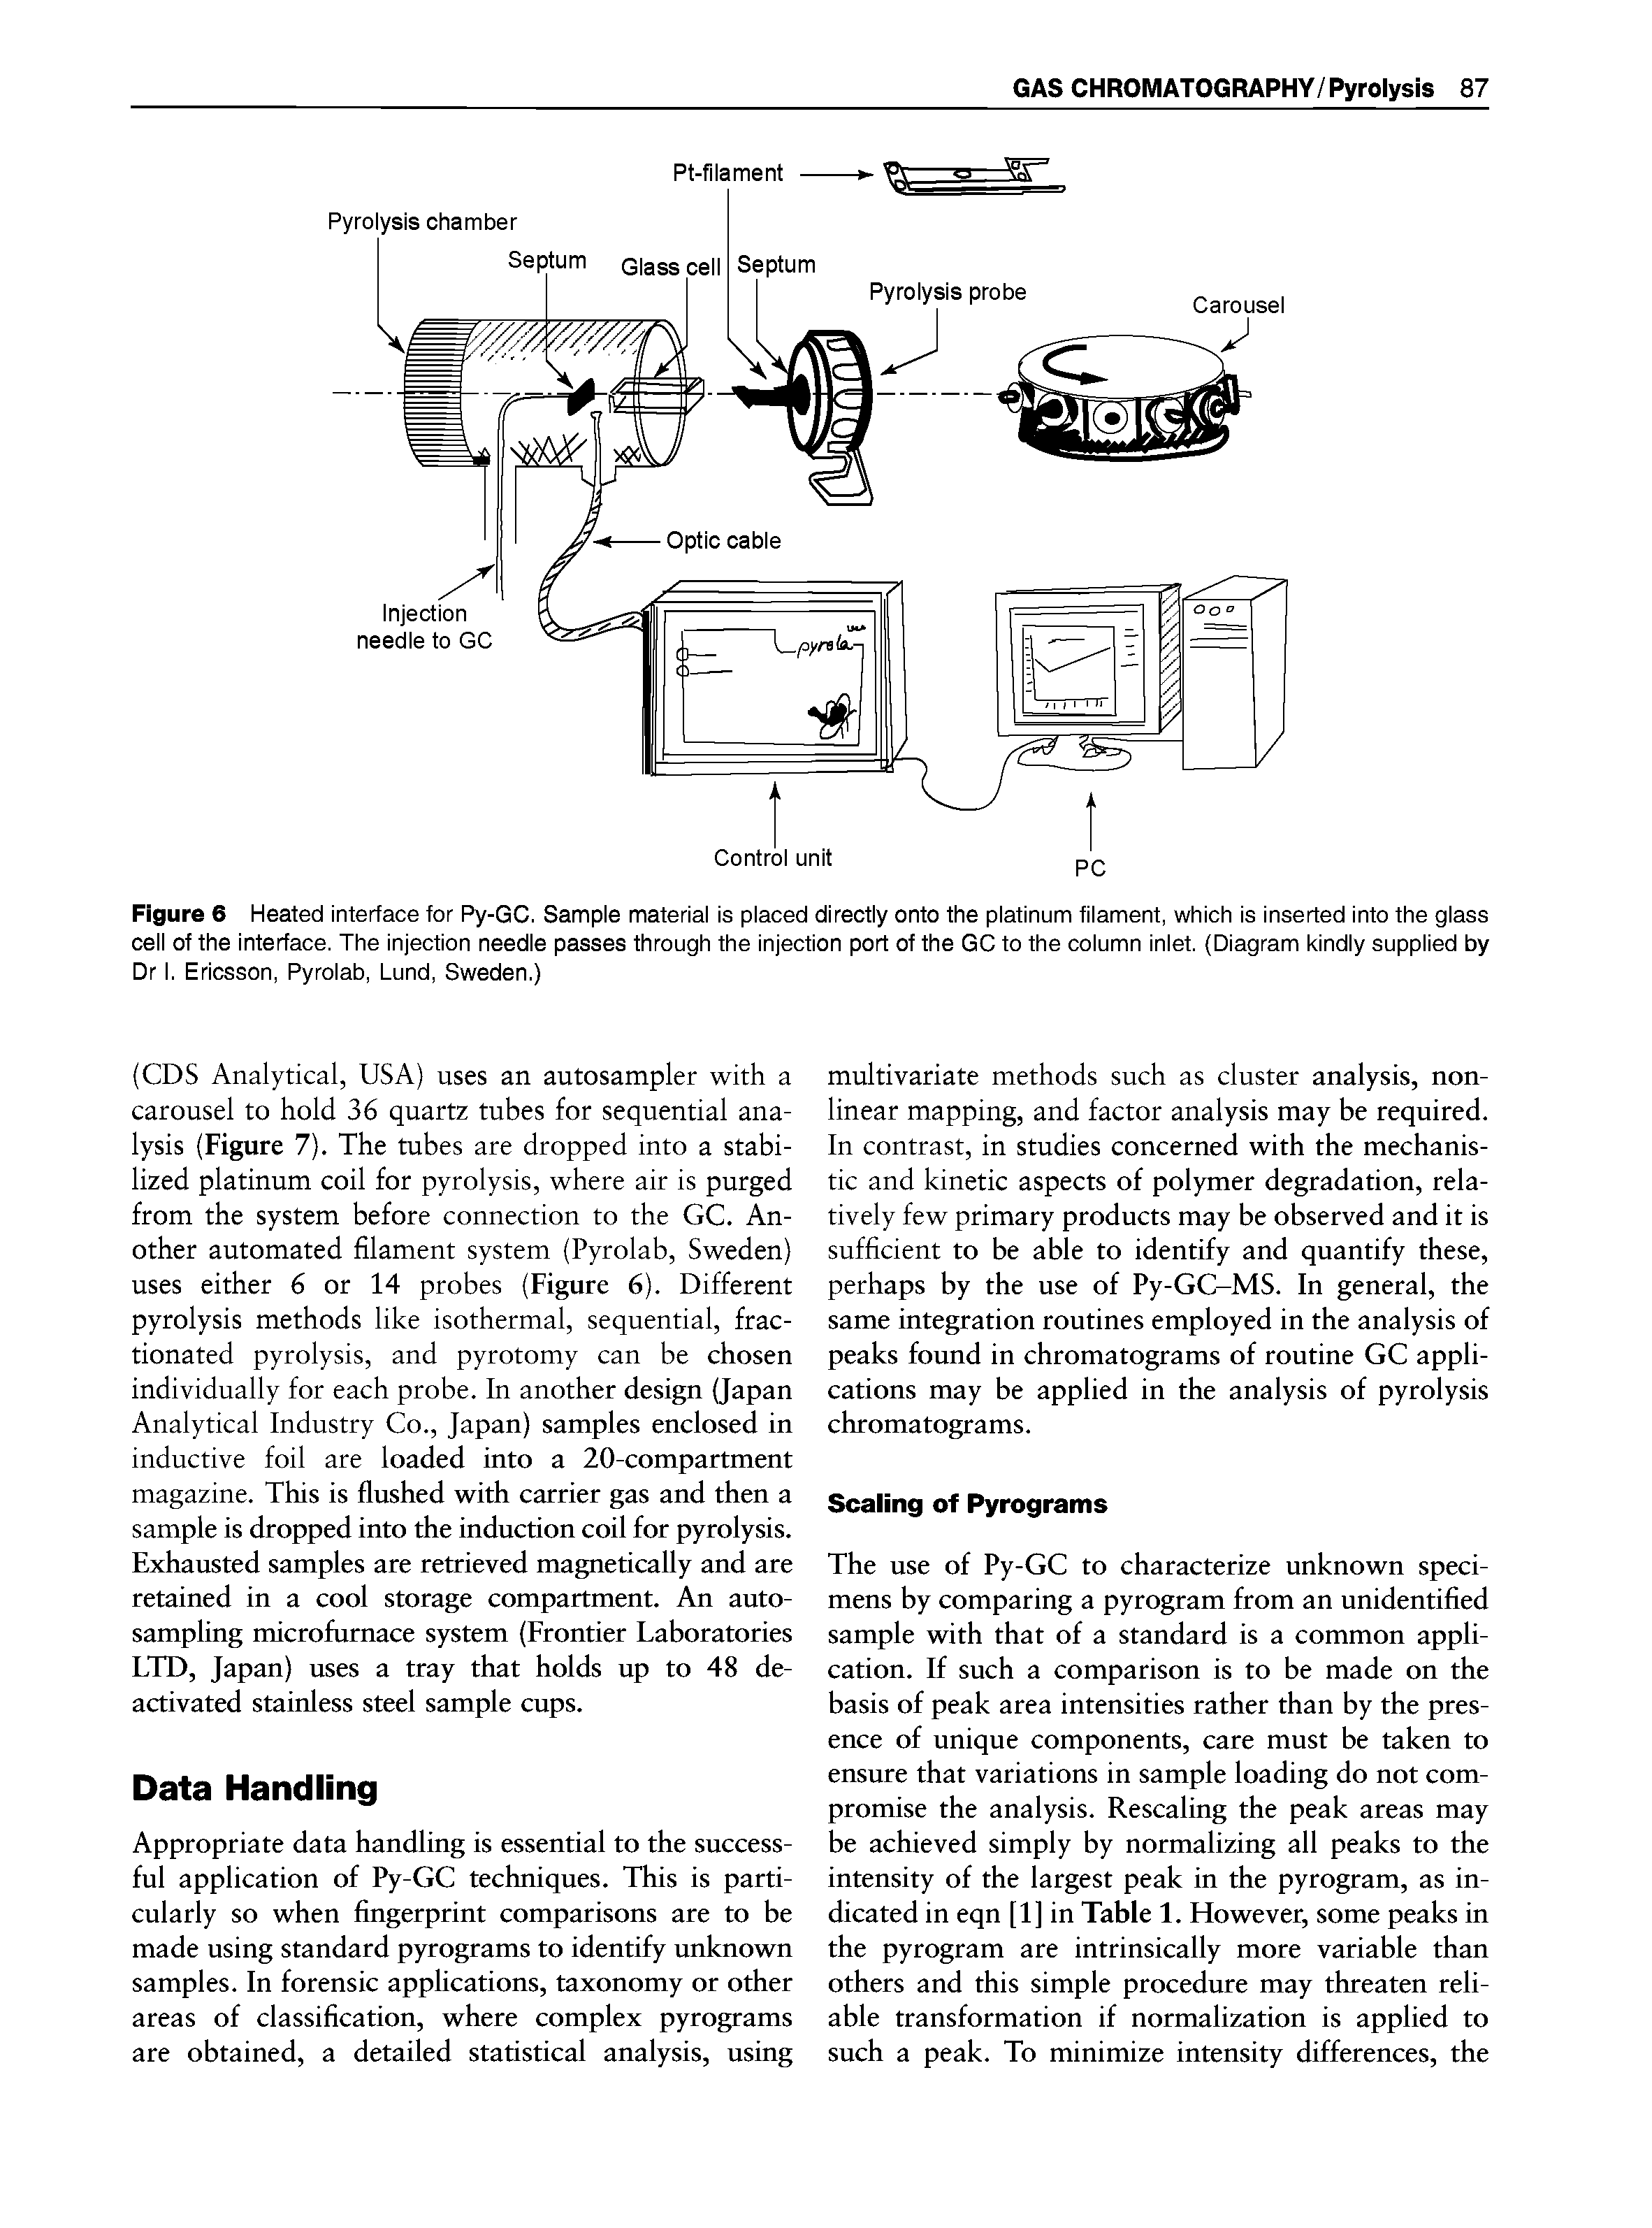 Figure 6 Heated interface for Py-GC. Sample material is placed directly onto the platinum filament, which is inserted into the glass cell of the interface. The injection needle passes through the injection port of the GC to the column inlet. (Diagram kindly supplied by Dr I. Ericsson, Pyrolab, Lund, Sweden.)...